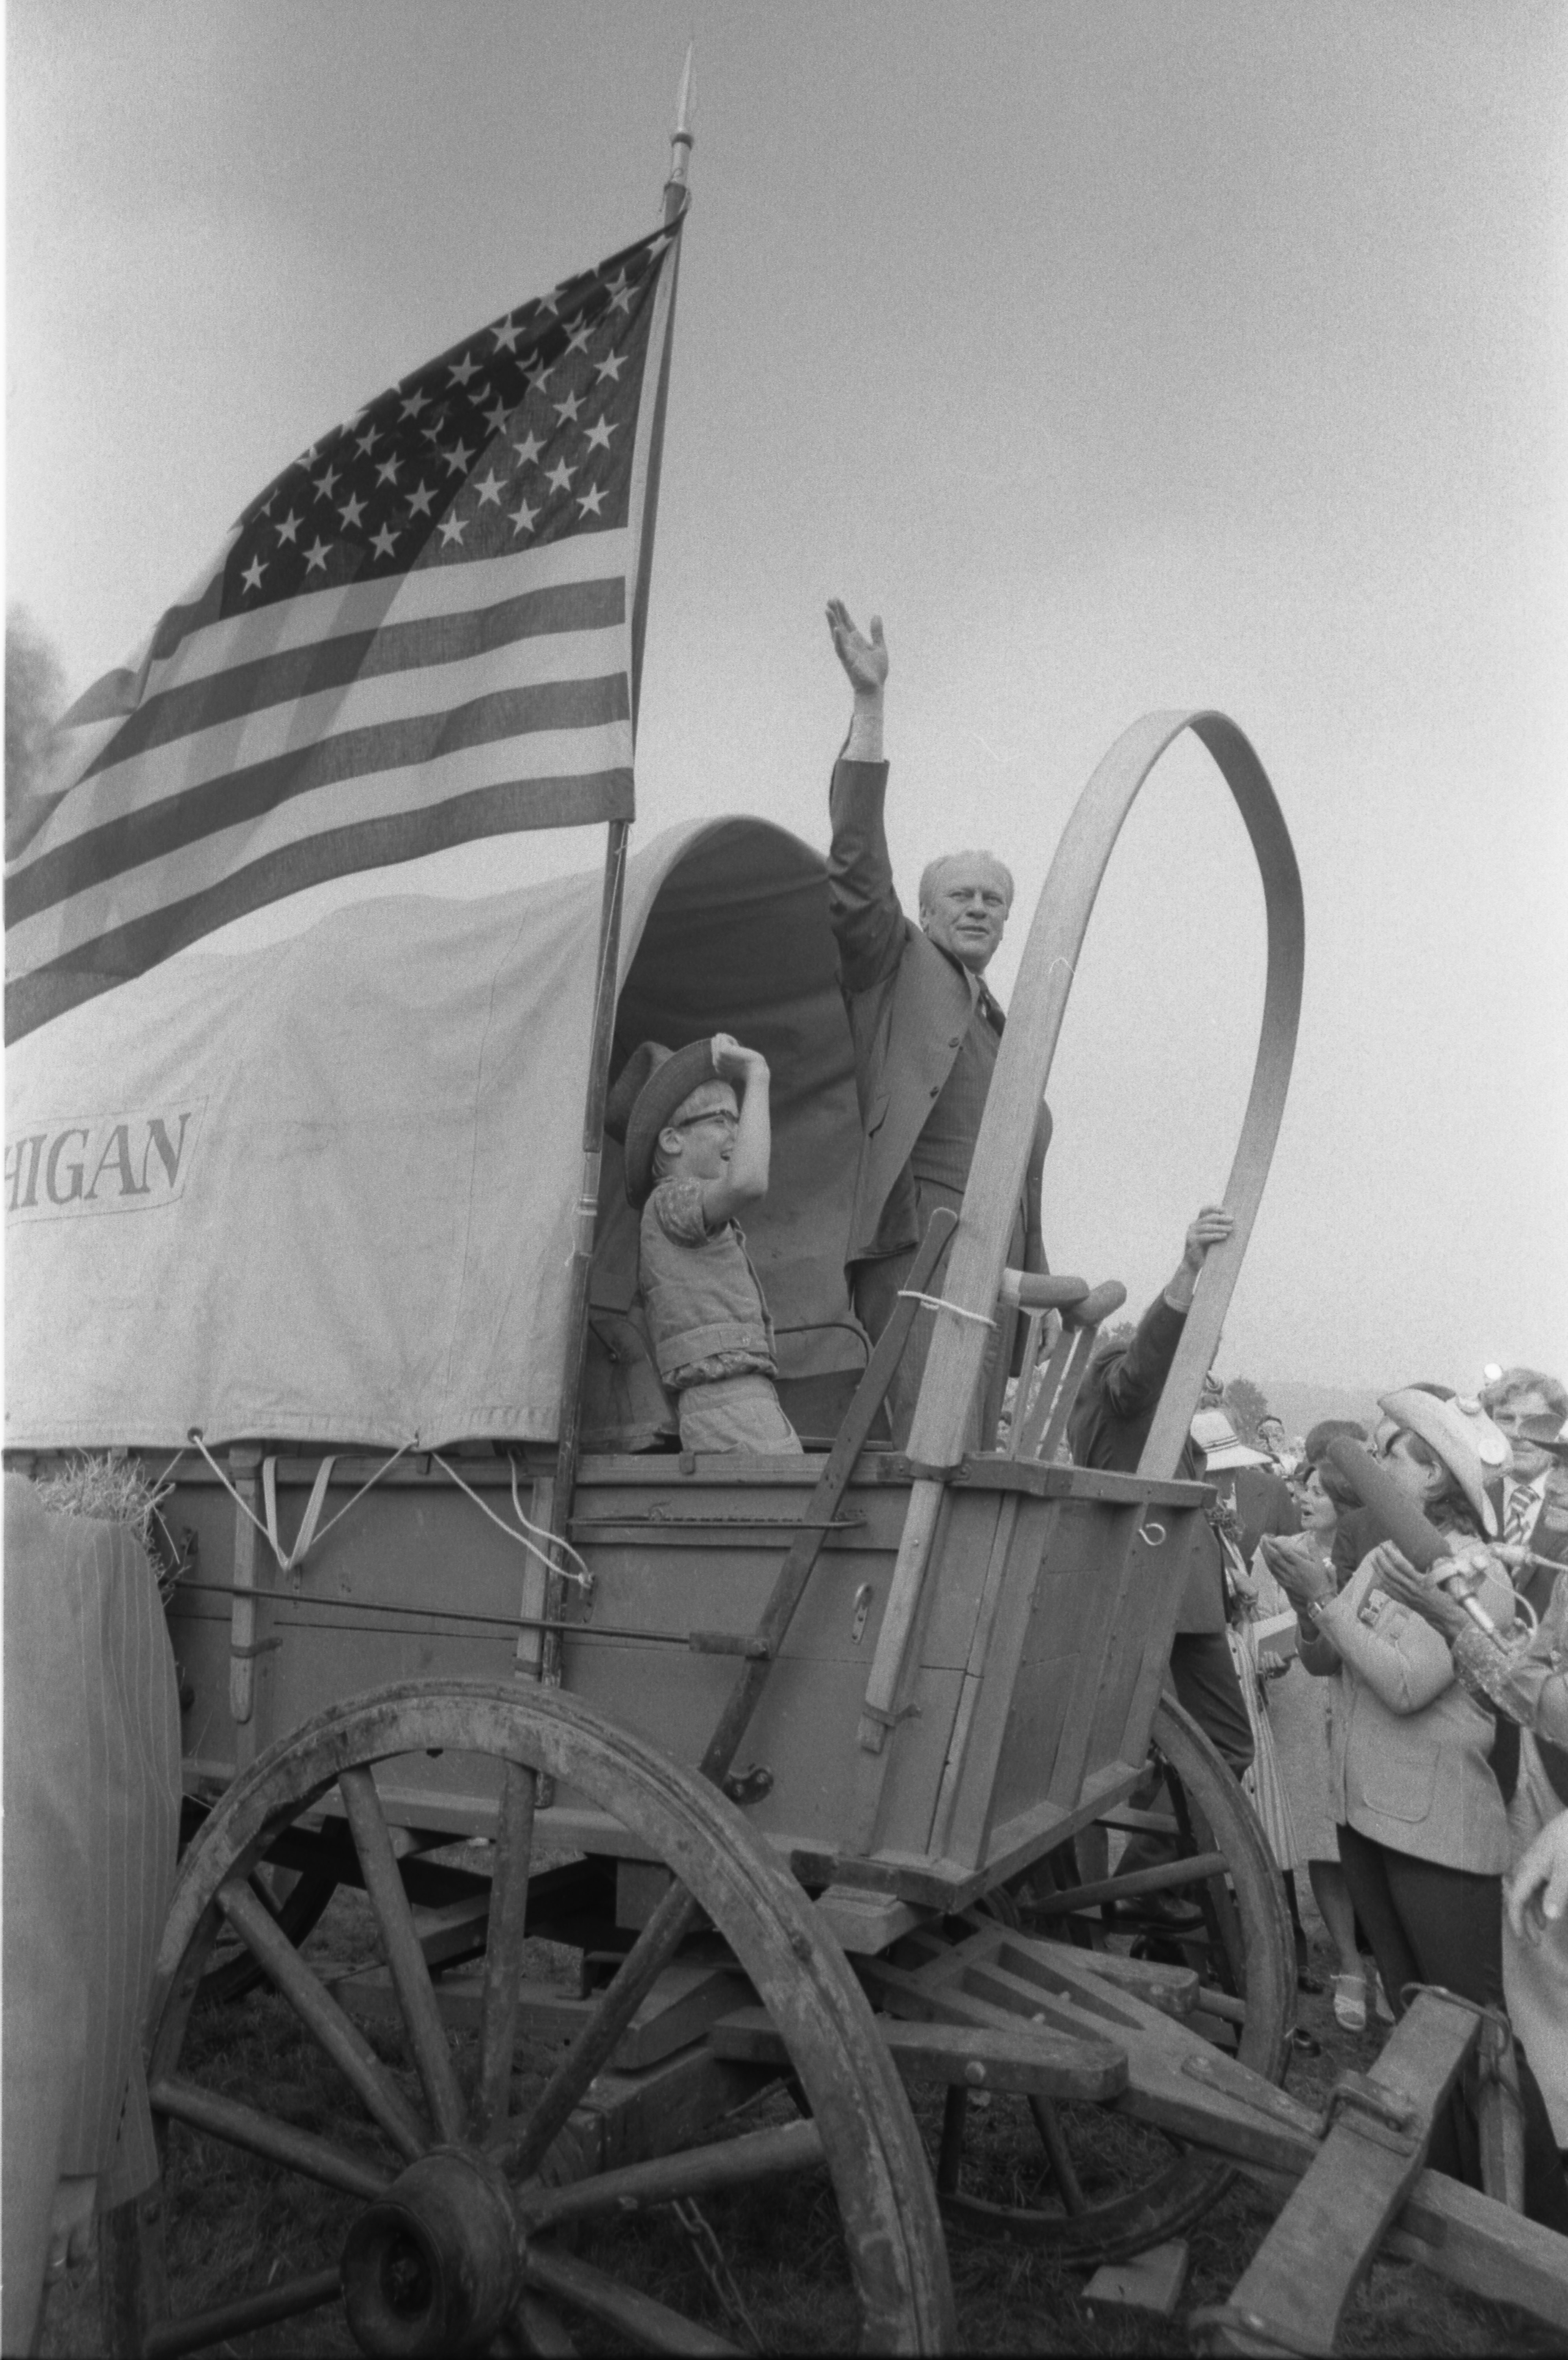 President Ford boards the Michigan wagon at the Bicentennial Wagon Train Pilgrimage encampment, where covered wagon trains converged after crossing the nation on historical trails, Valley Forge State Park, Valley Forge, Pennsylvania, 7/4/1976.